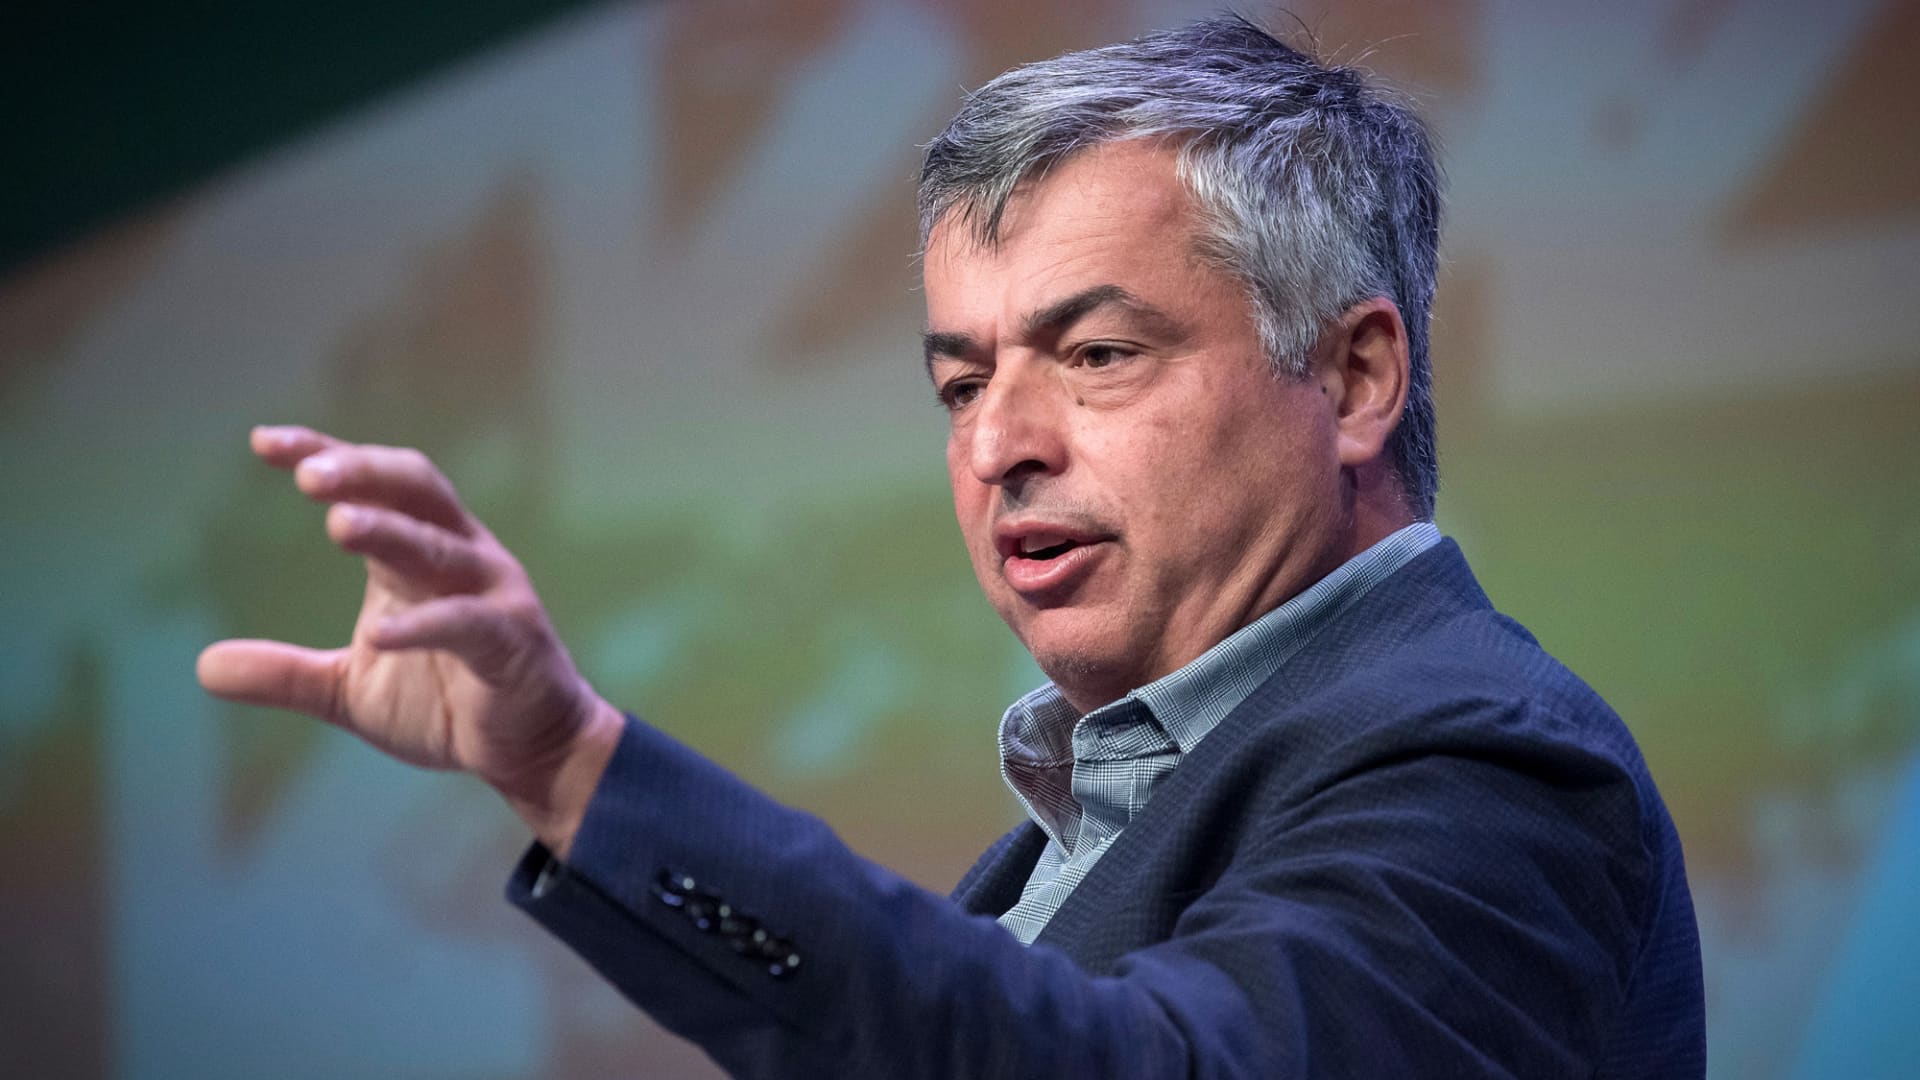 Apple exec Eddy Cue set to testify in Google trial about $19 billion search deal